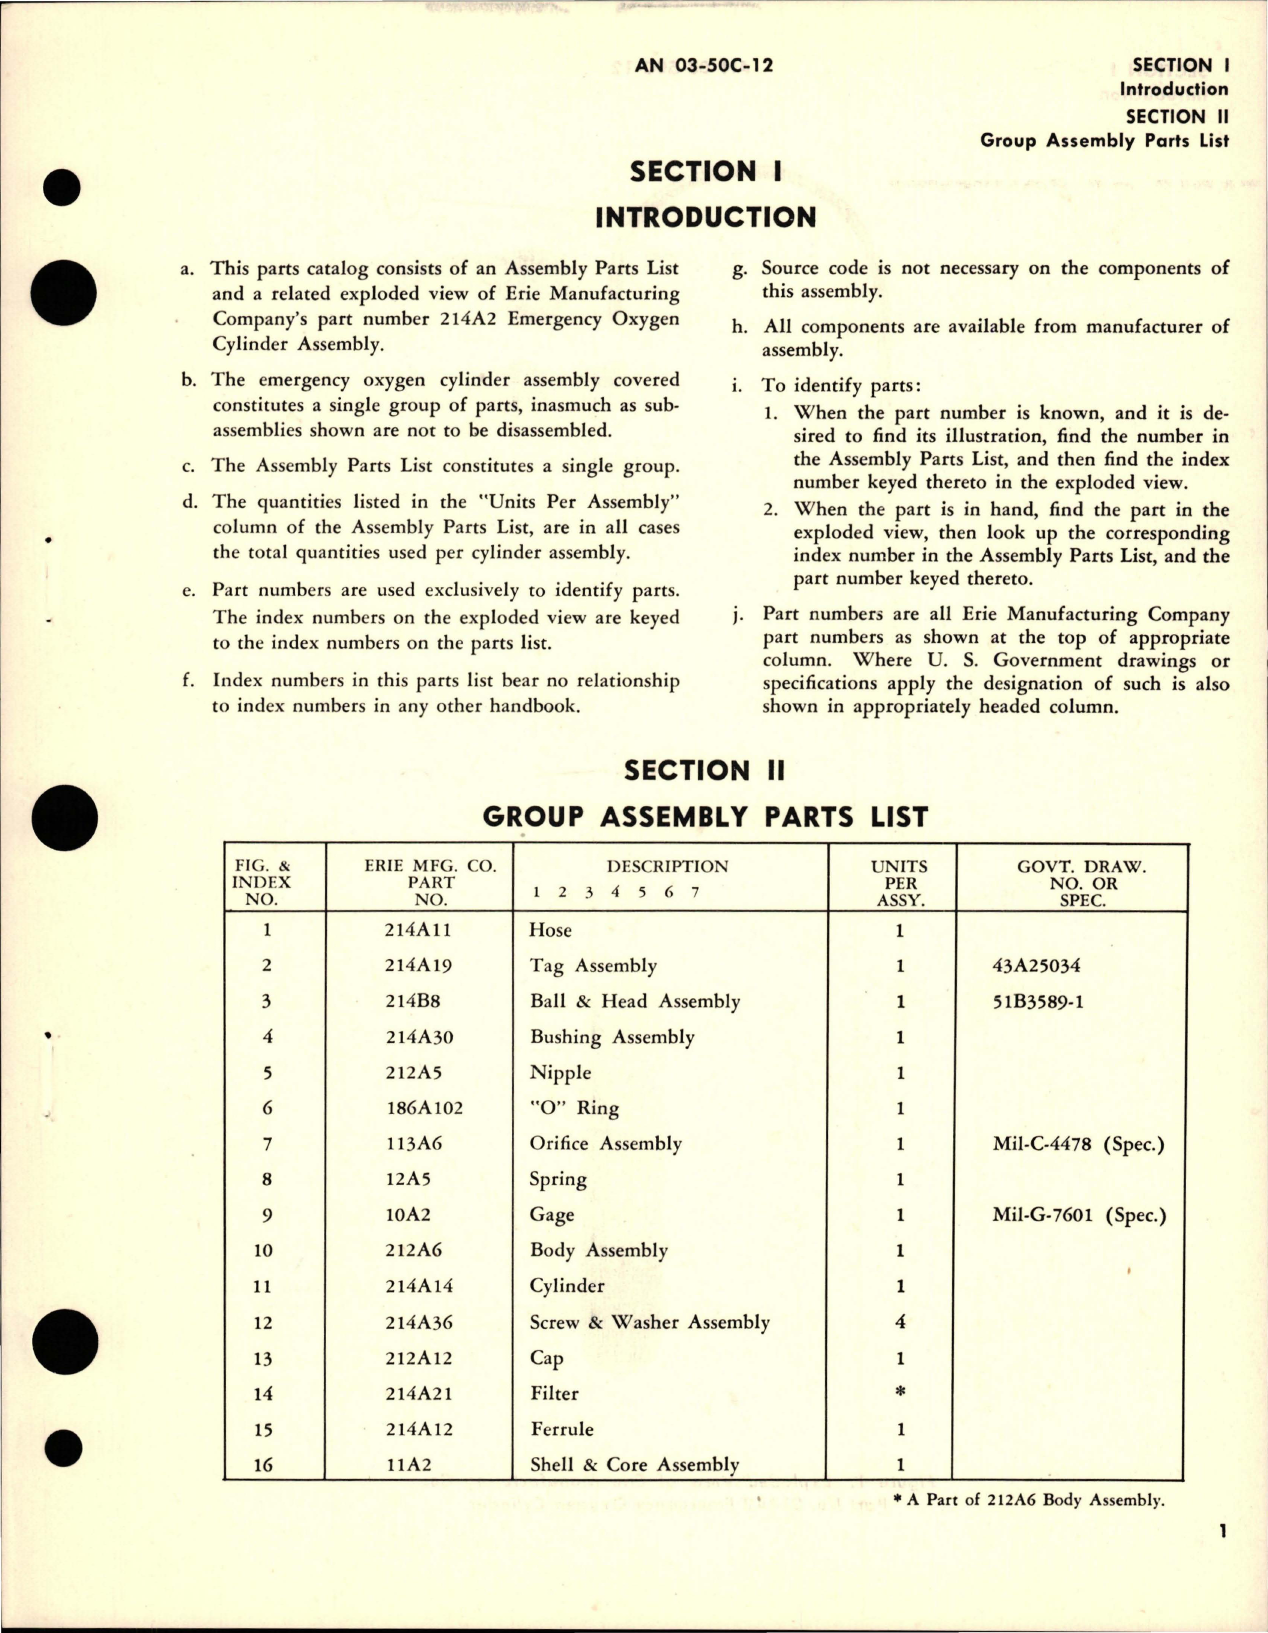 Sample page 5 from AirCorps Library document: Illustrated Parts Breakdown for Emergency Oxygen Cylinder Assembly - Part 214A2 